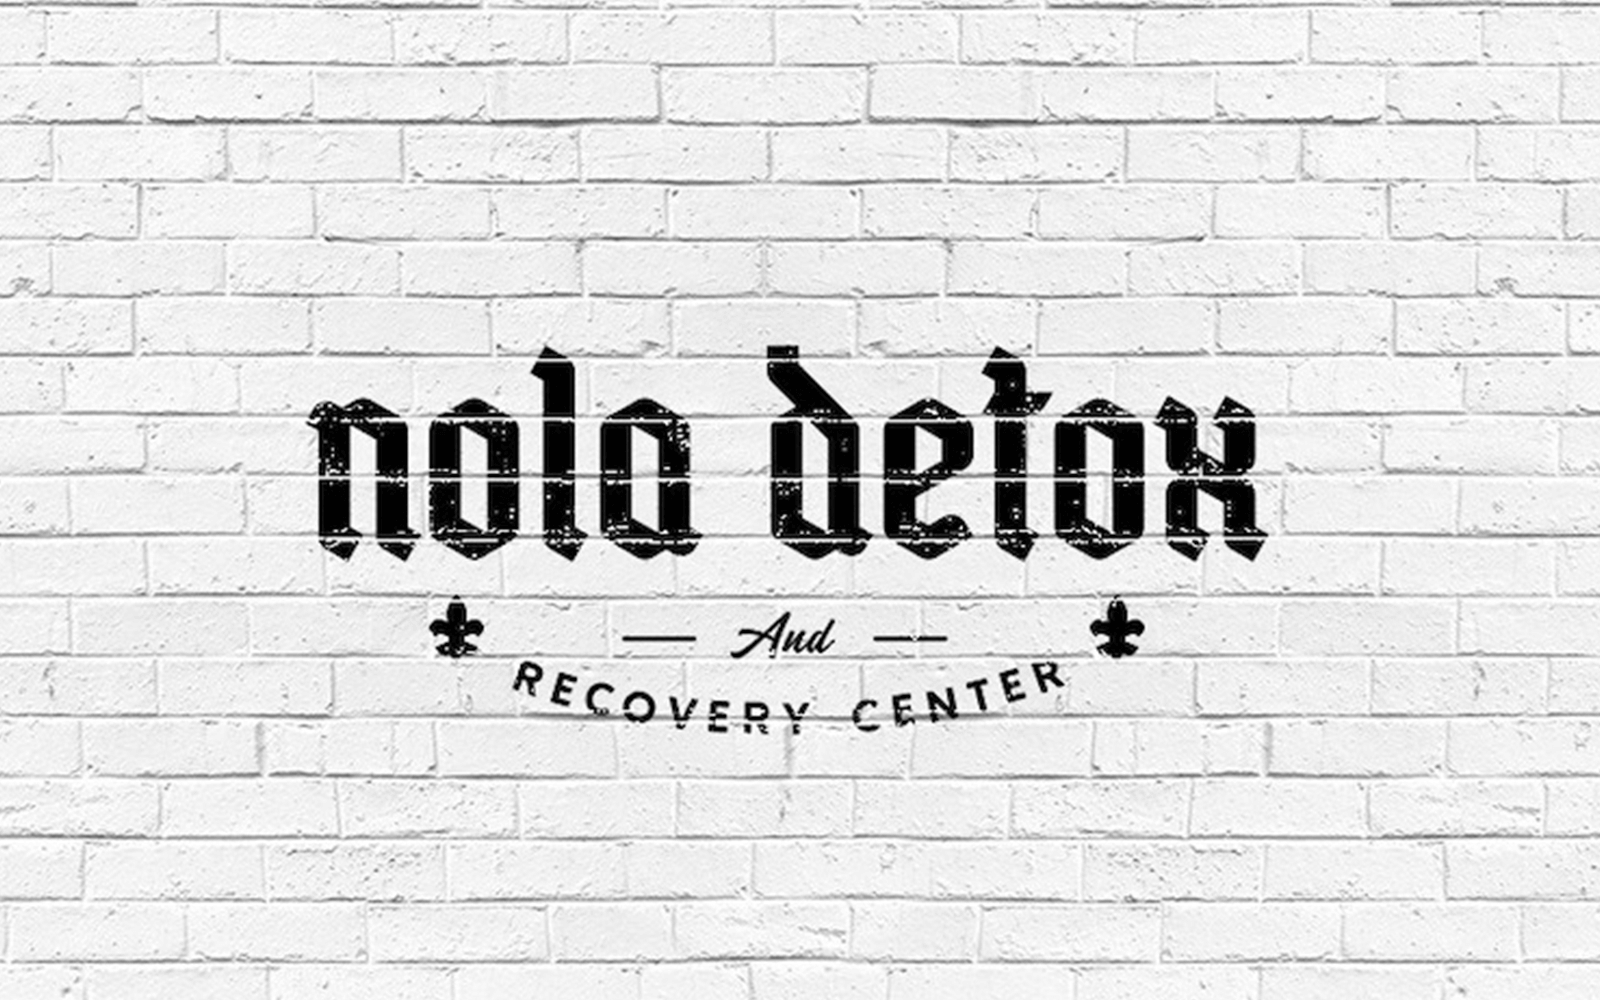 NOLA Detox and Recovery Center Opens Its Doors to Patients - NOLA Detox and Recovery Center